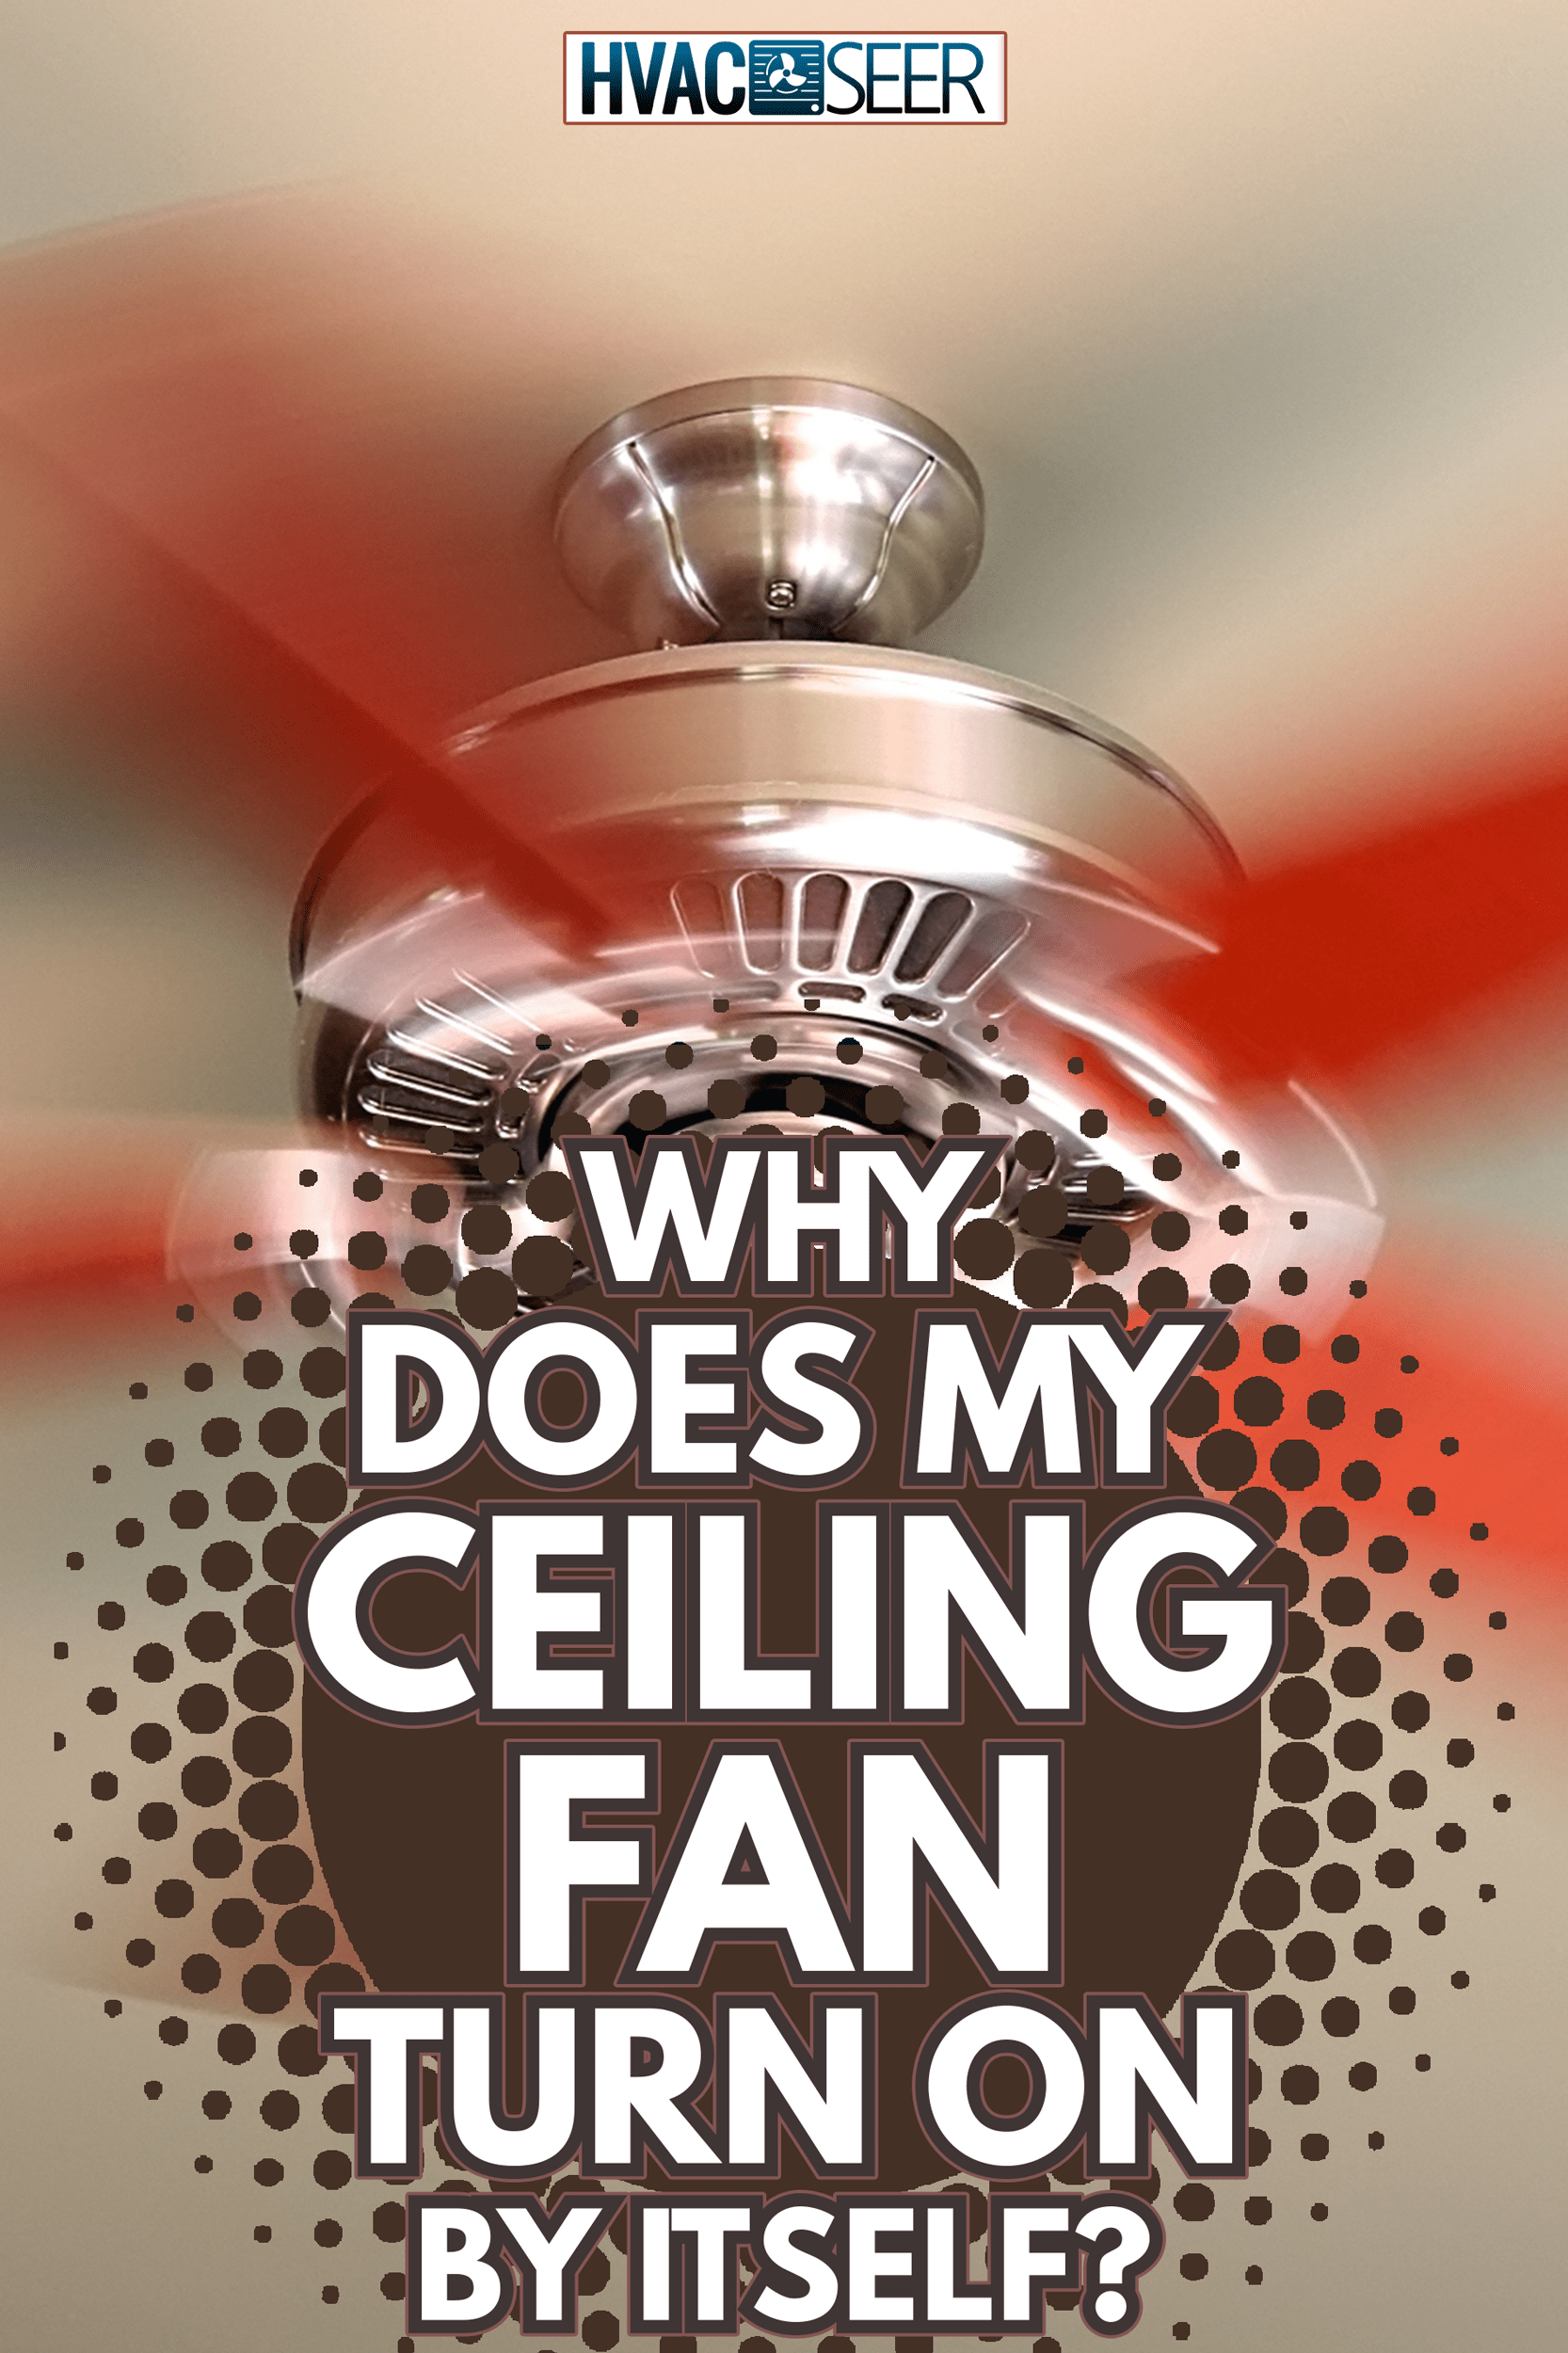 Cooling Motion Of A Ceiling Fan - Why Does My Ceiling Fan Turn On By Itself